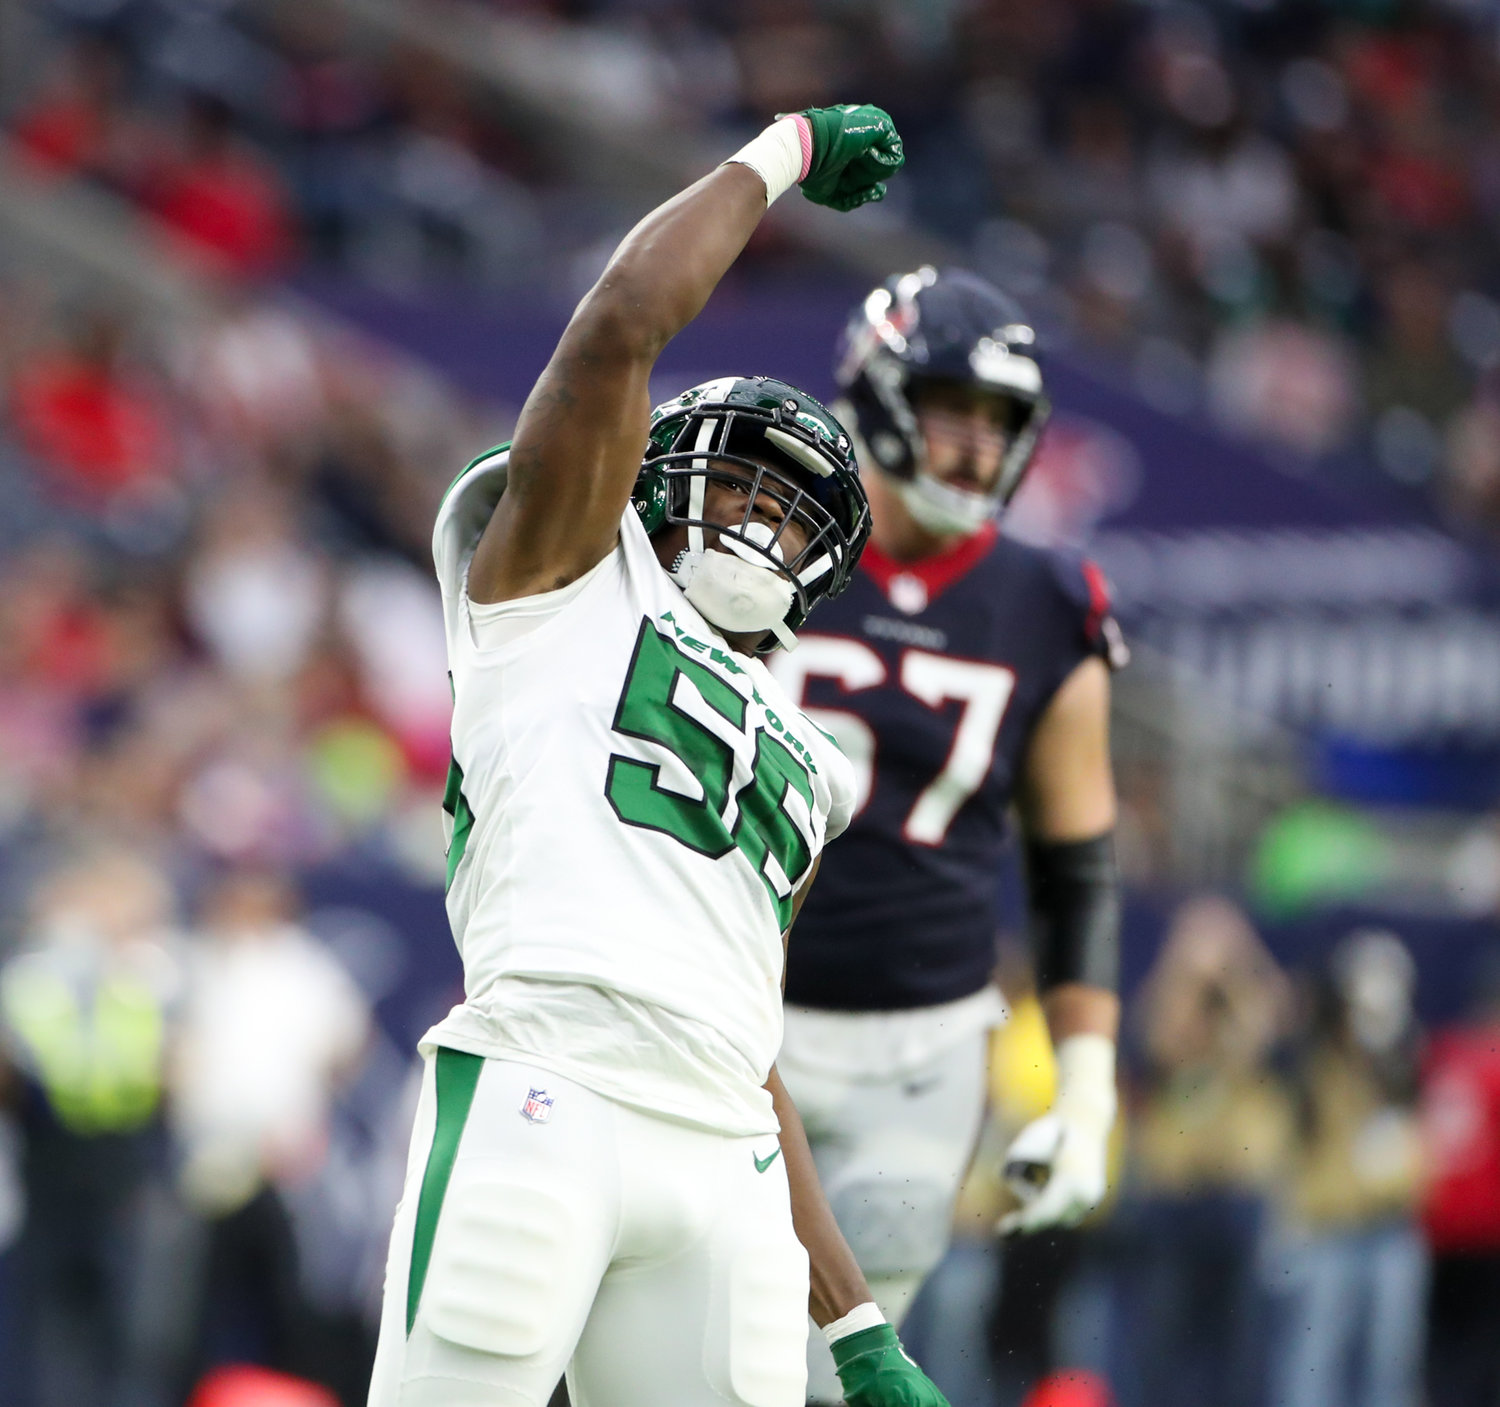 New York Jets linebacker Quincy Williams (56) gestures after making a tackle for loss during an NFL game between the Houston Texans and the New York Jets on November 28, 2021 in Houston, Texas. The Jets won, 21-14